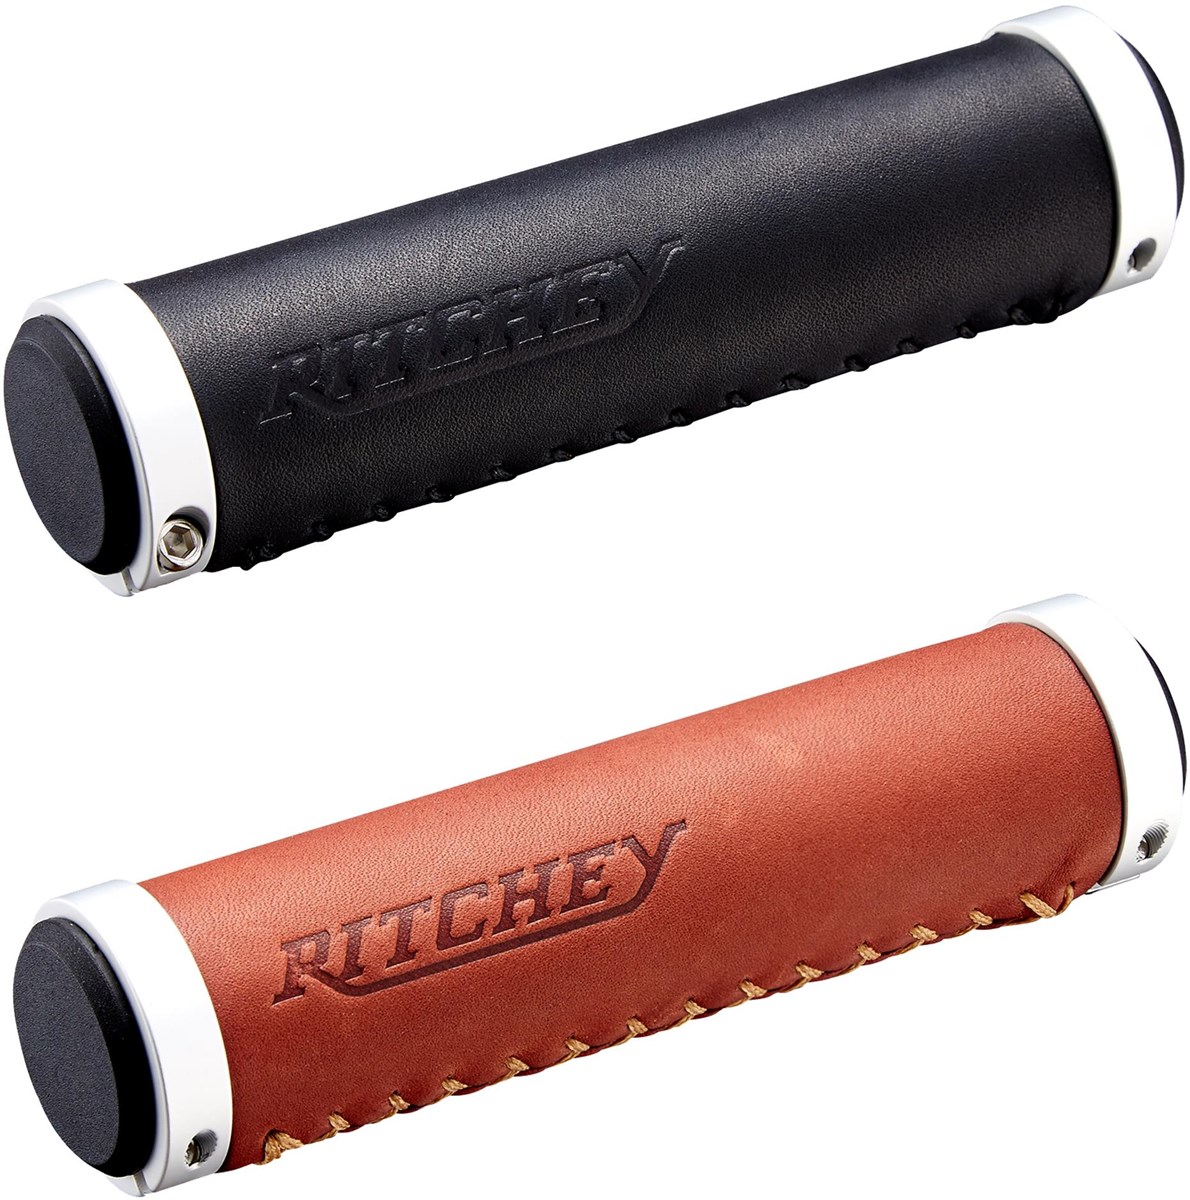 Ritchey Classic Locking Genuine Leather Grip product image